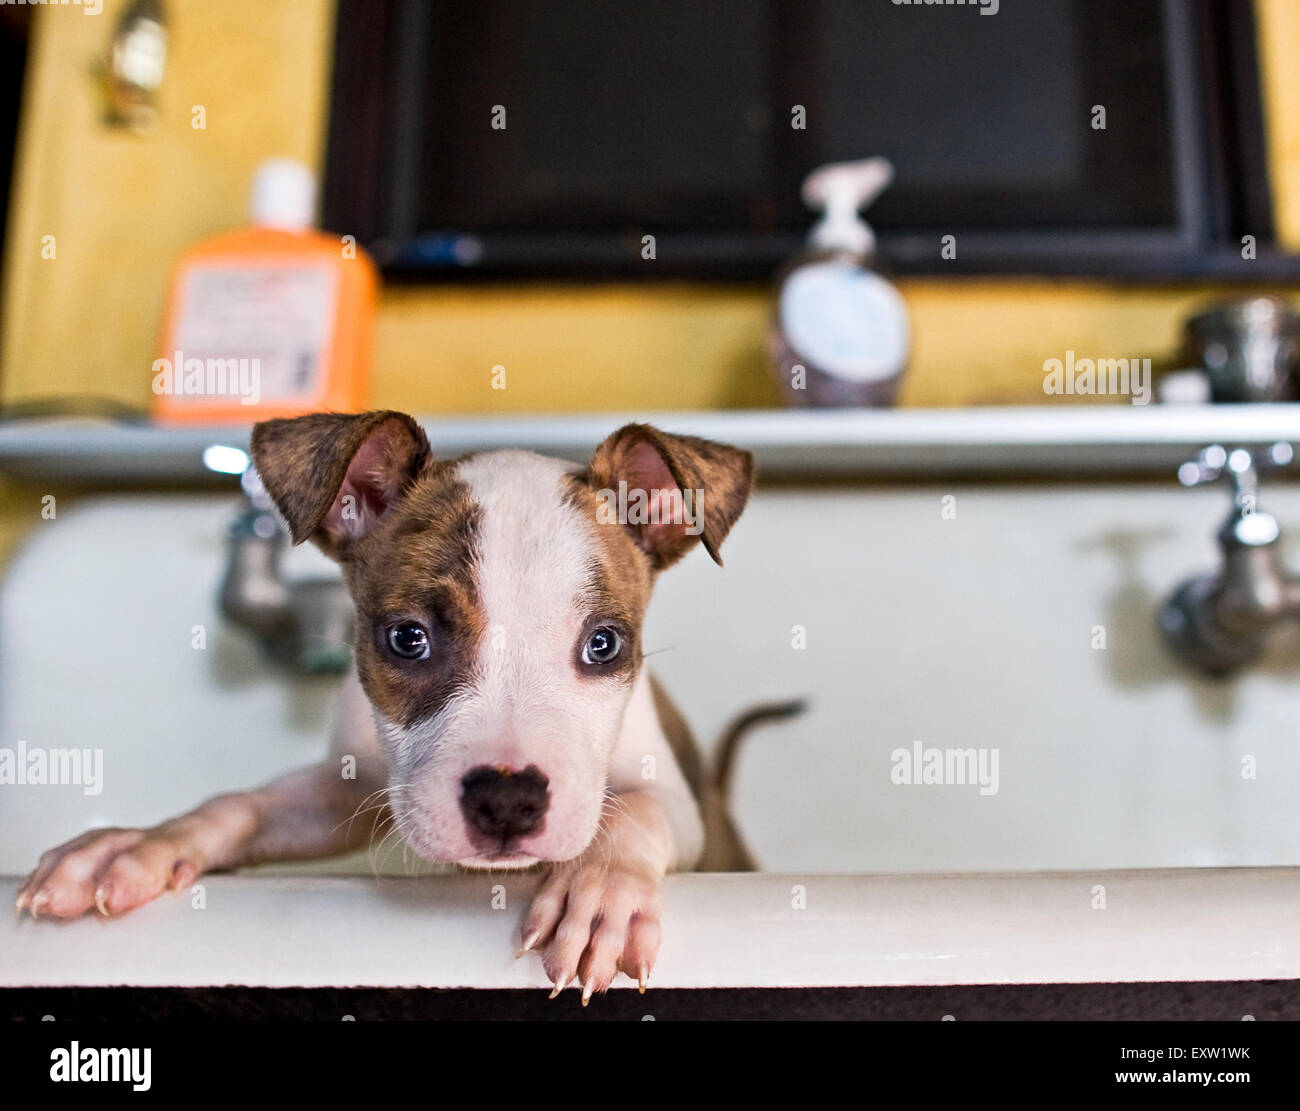 Brown and white puppy with front feet up on side of big sink after a bath Stock Photo